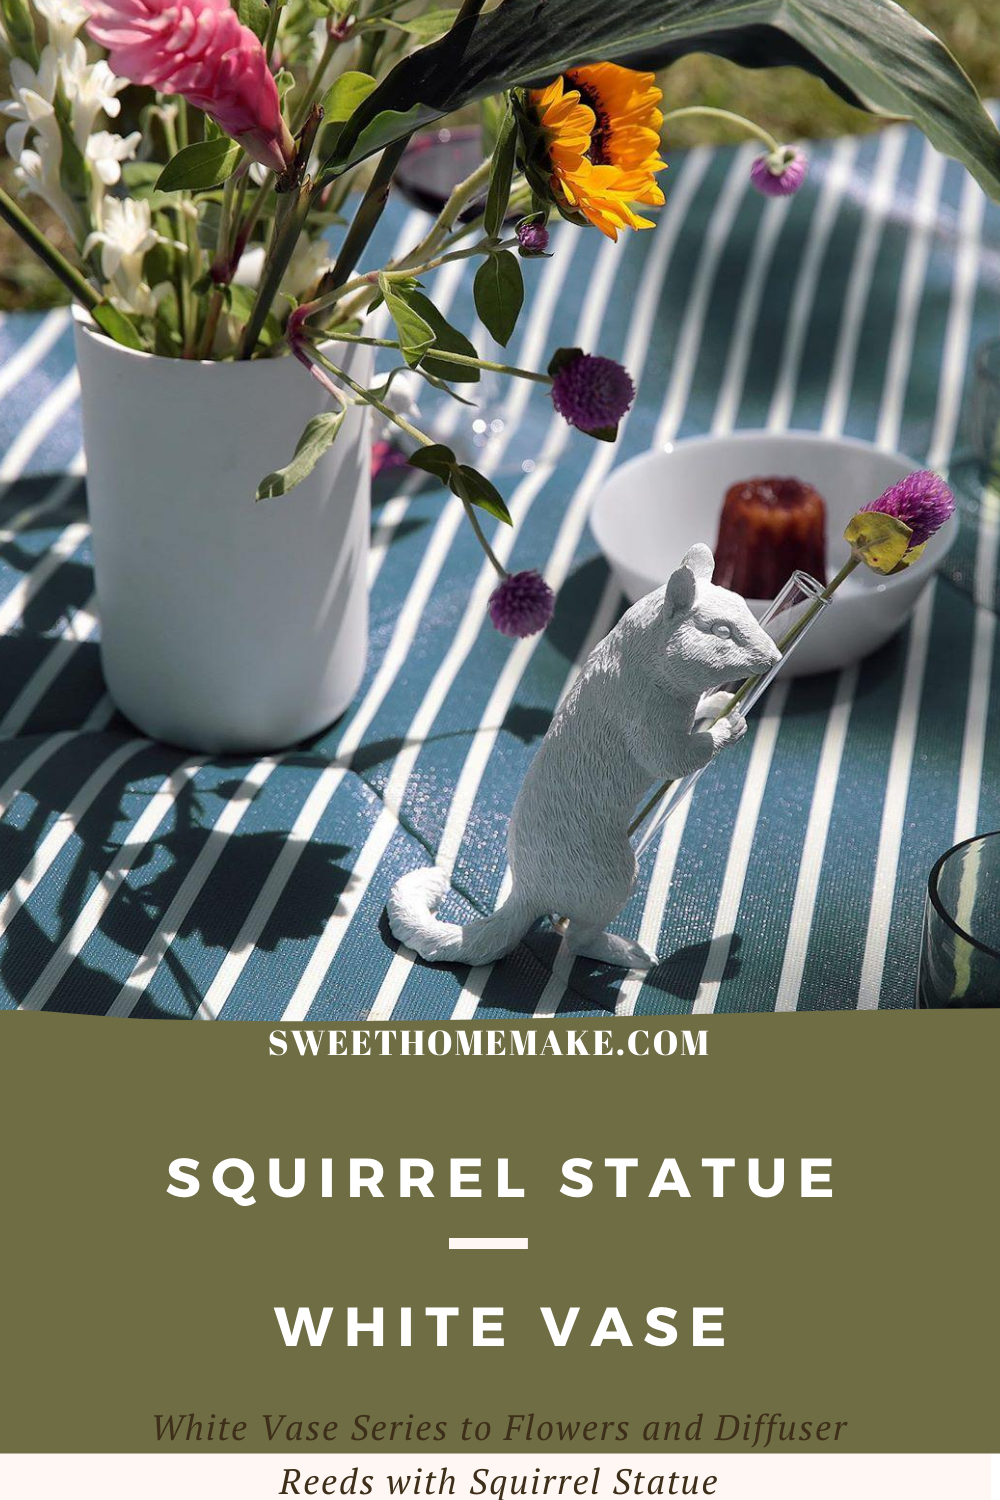 Squirrel Statue Vase comes from nature for Dried Flowers-Diffuser Reeds